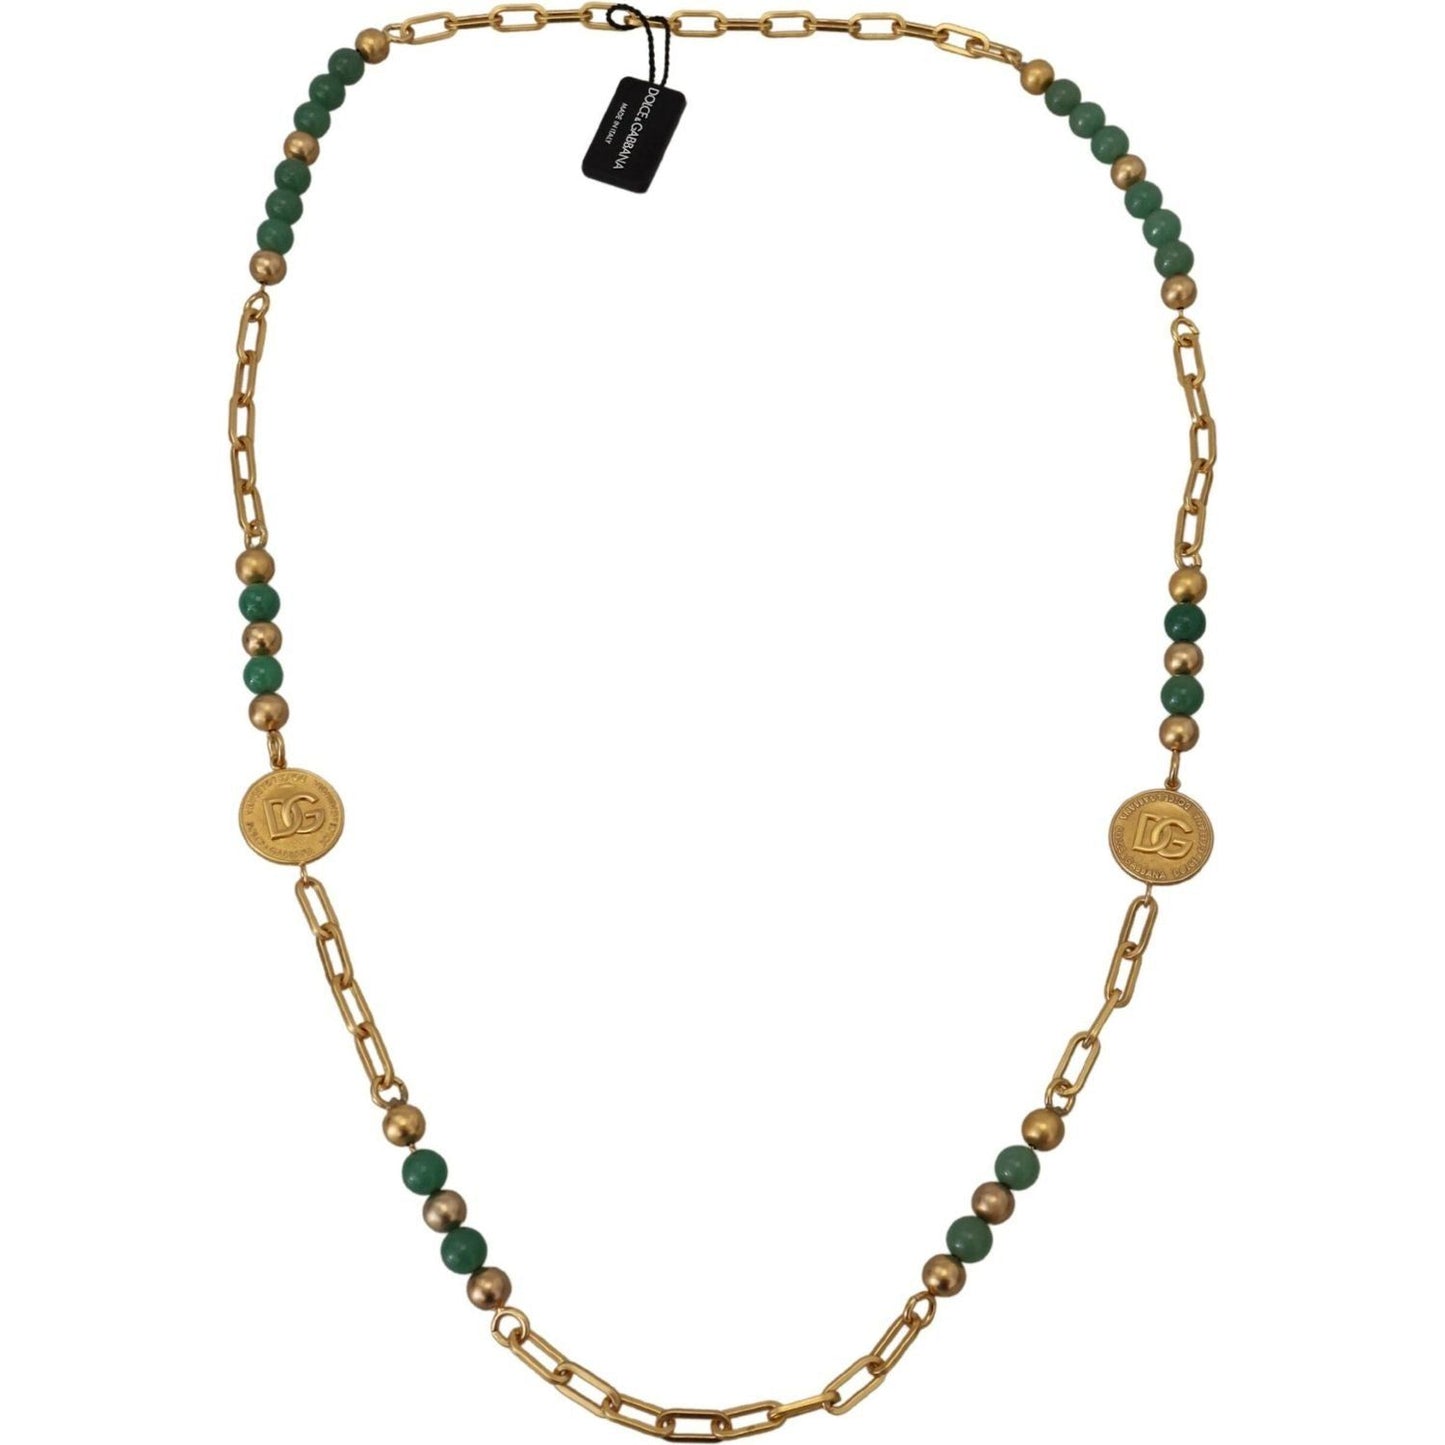 Dolce & Gabbana Elegant Gold-Plated Gemstone Necklace gold-brass-natural-gem-beaded-logo-chain-necklace IMG_7174-scaled-81ce1e08-a0d.jpg